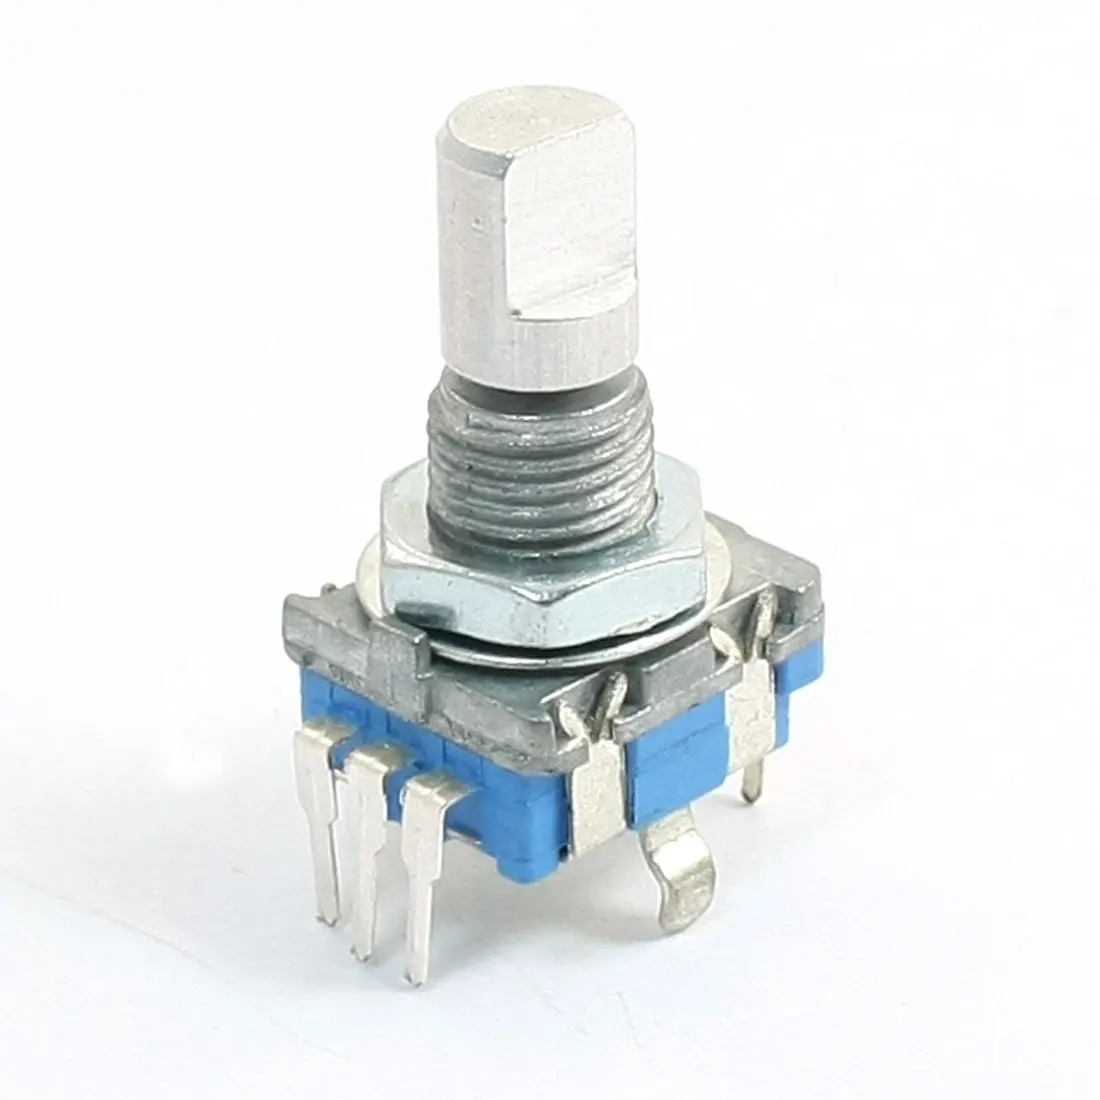 

1Pc 20 Detent Points 360 Degree Rotary Encoder EC11 w Push Button 5Pin D Shaft With A Built In Push Button Switch for Data Entry